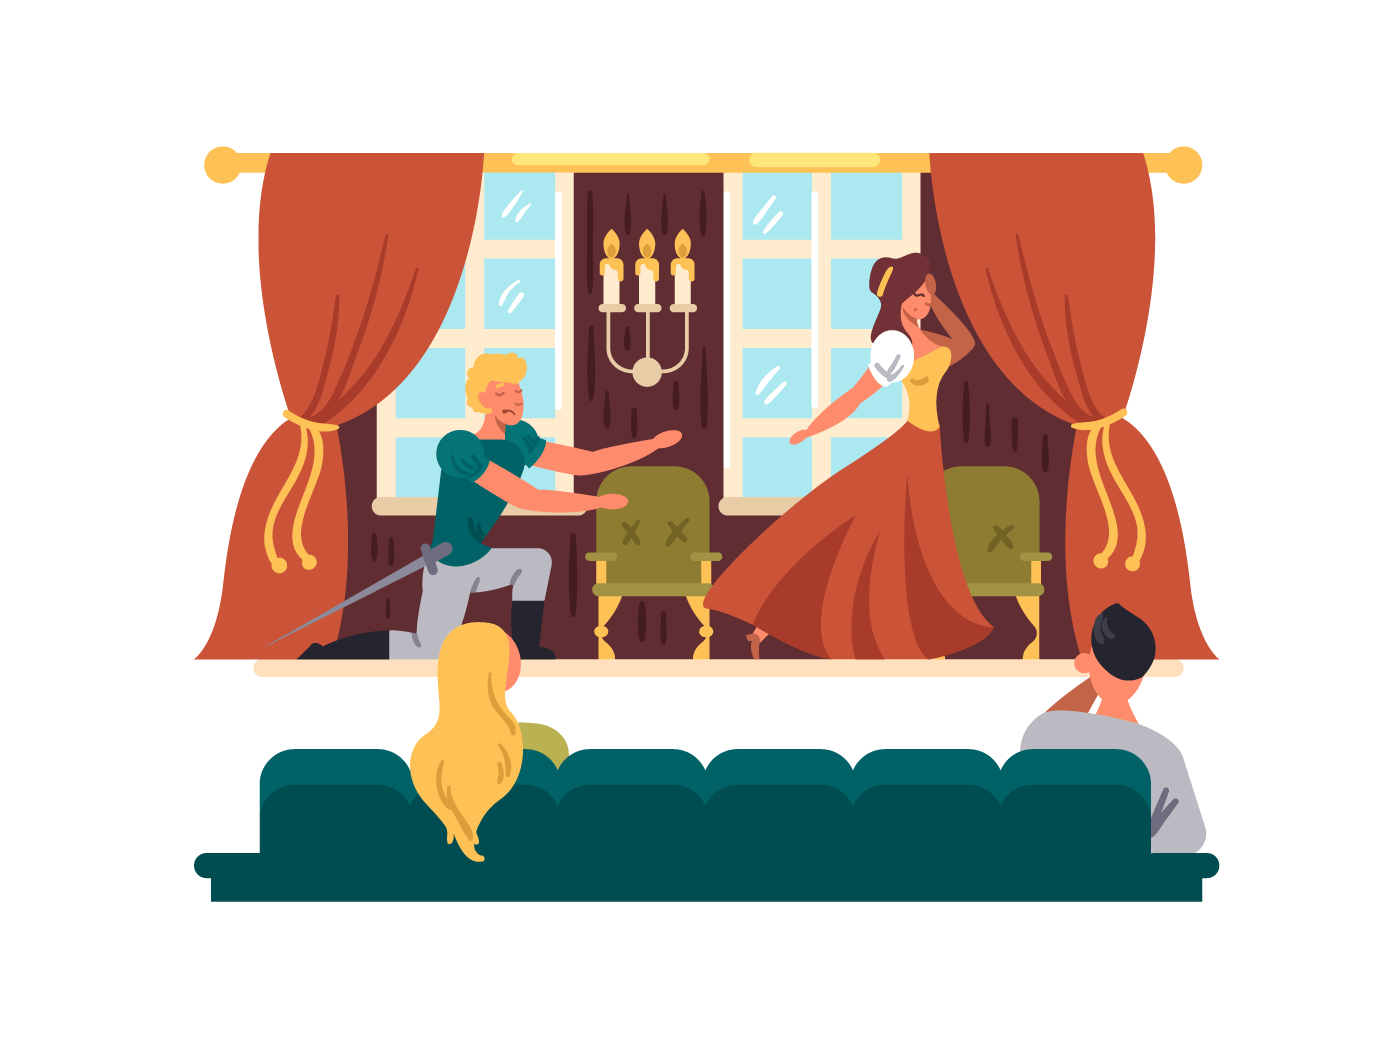 Theatrical performance on stage. Actors play drama in theater. Vector illustration